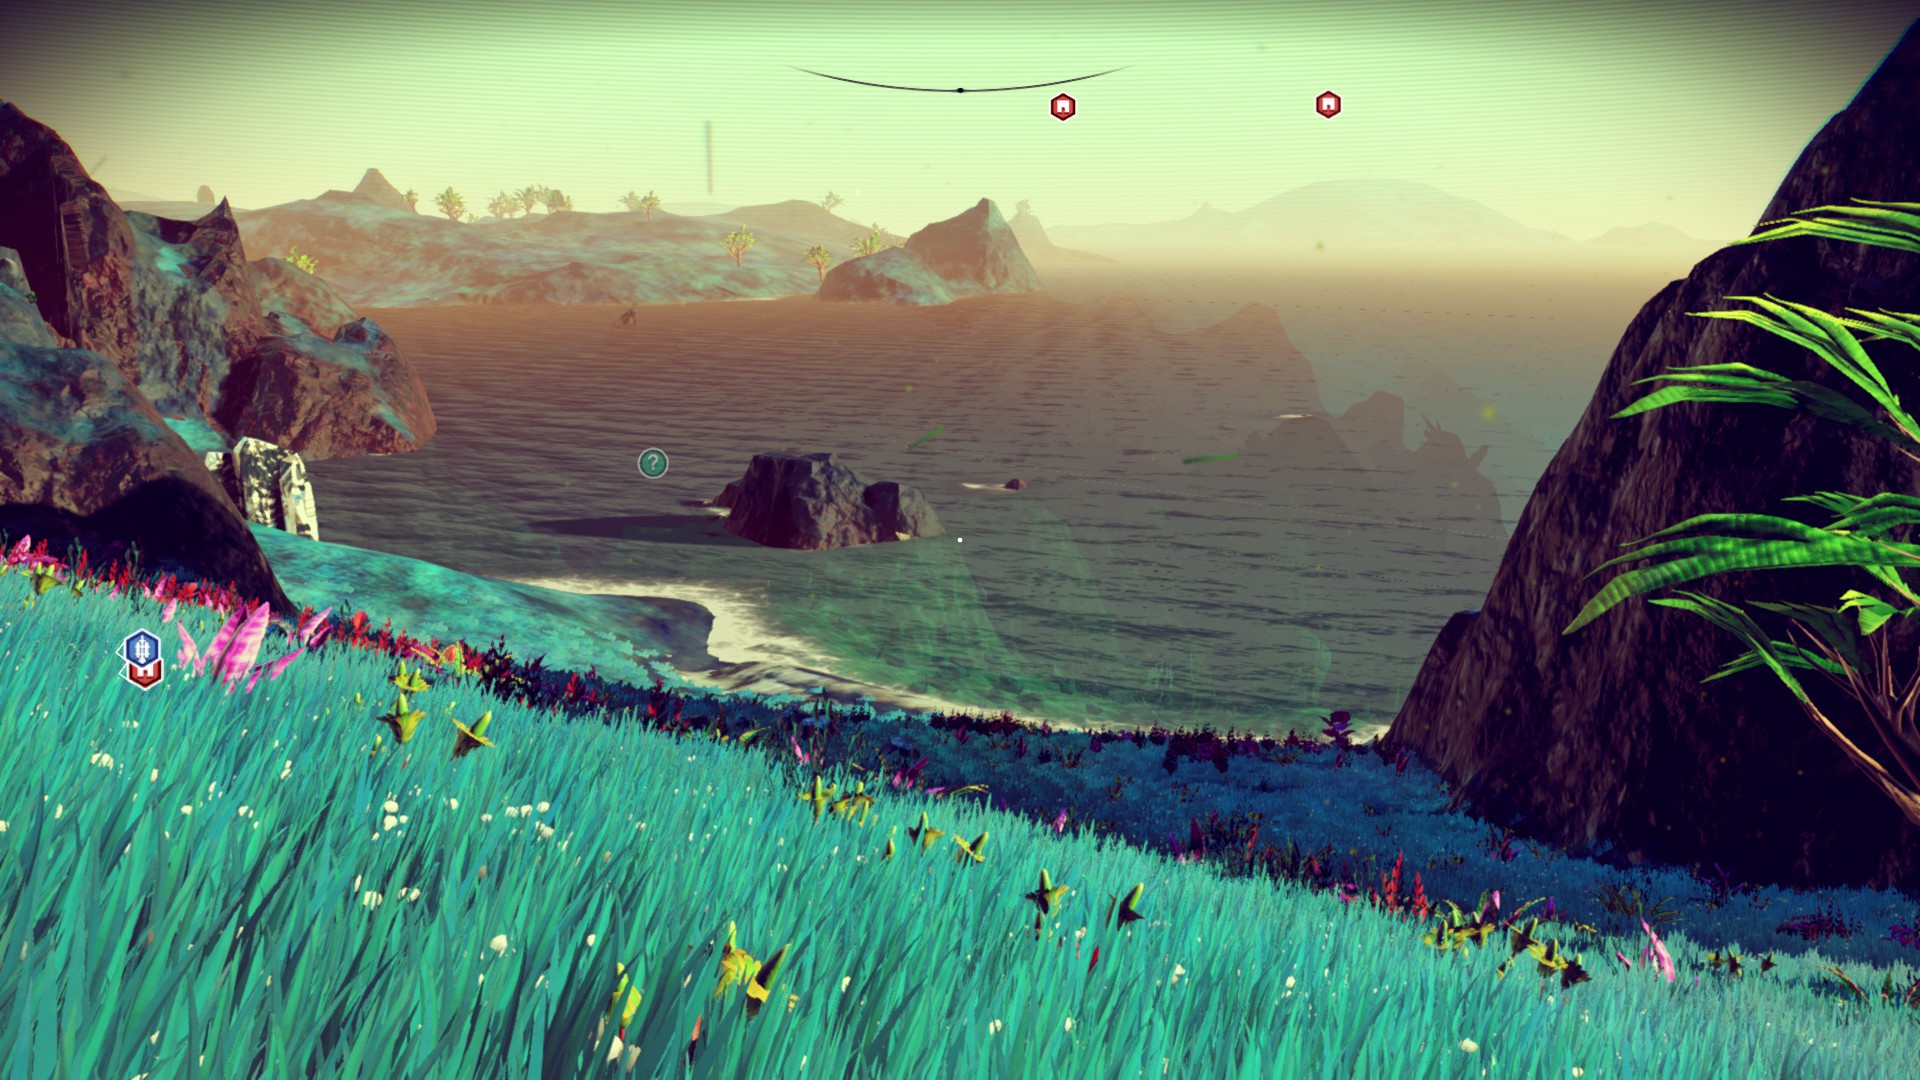 No Man's Sky is a technical marvel. An example of virtual sightseeing. 